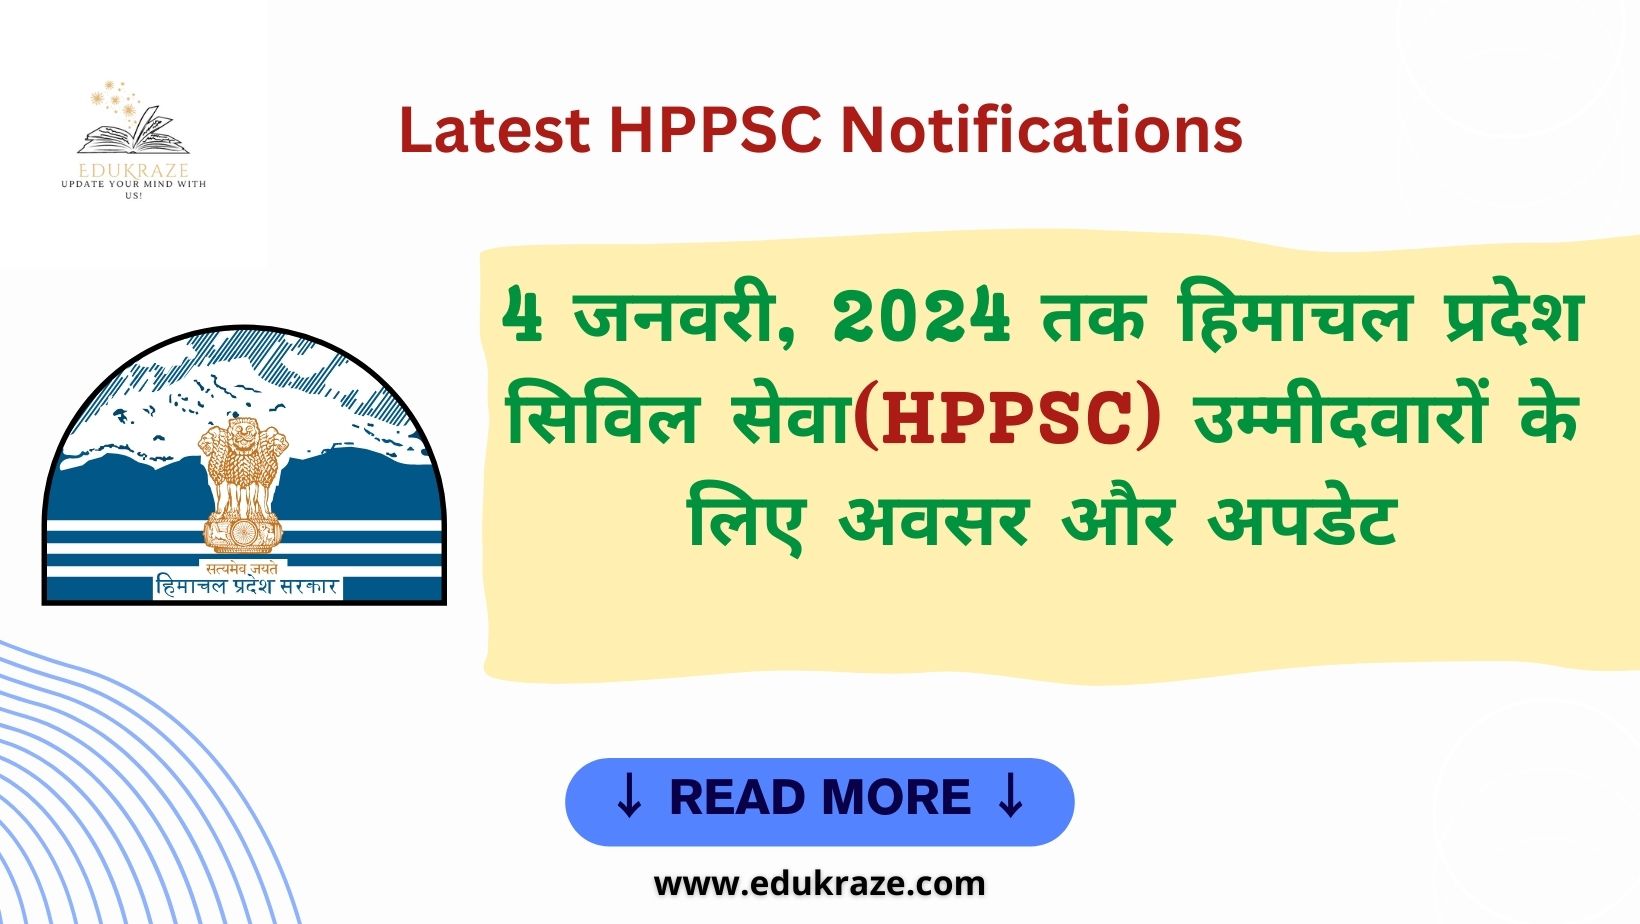 All Notifications by HPPSC - Himachal Pradesh Public Service Commission till 4th Jan 2024